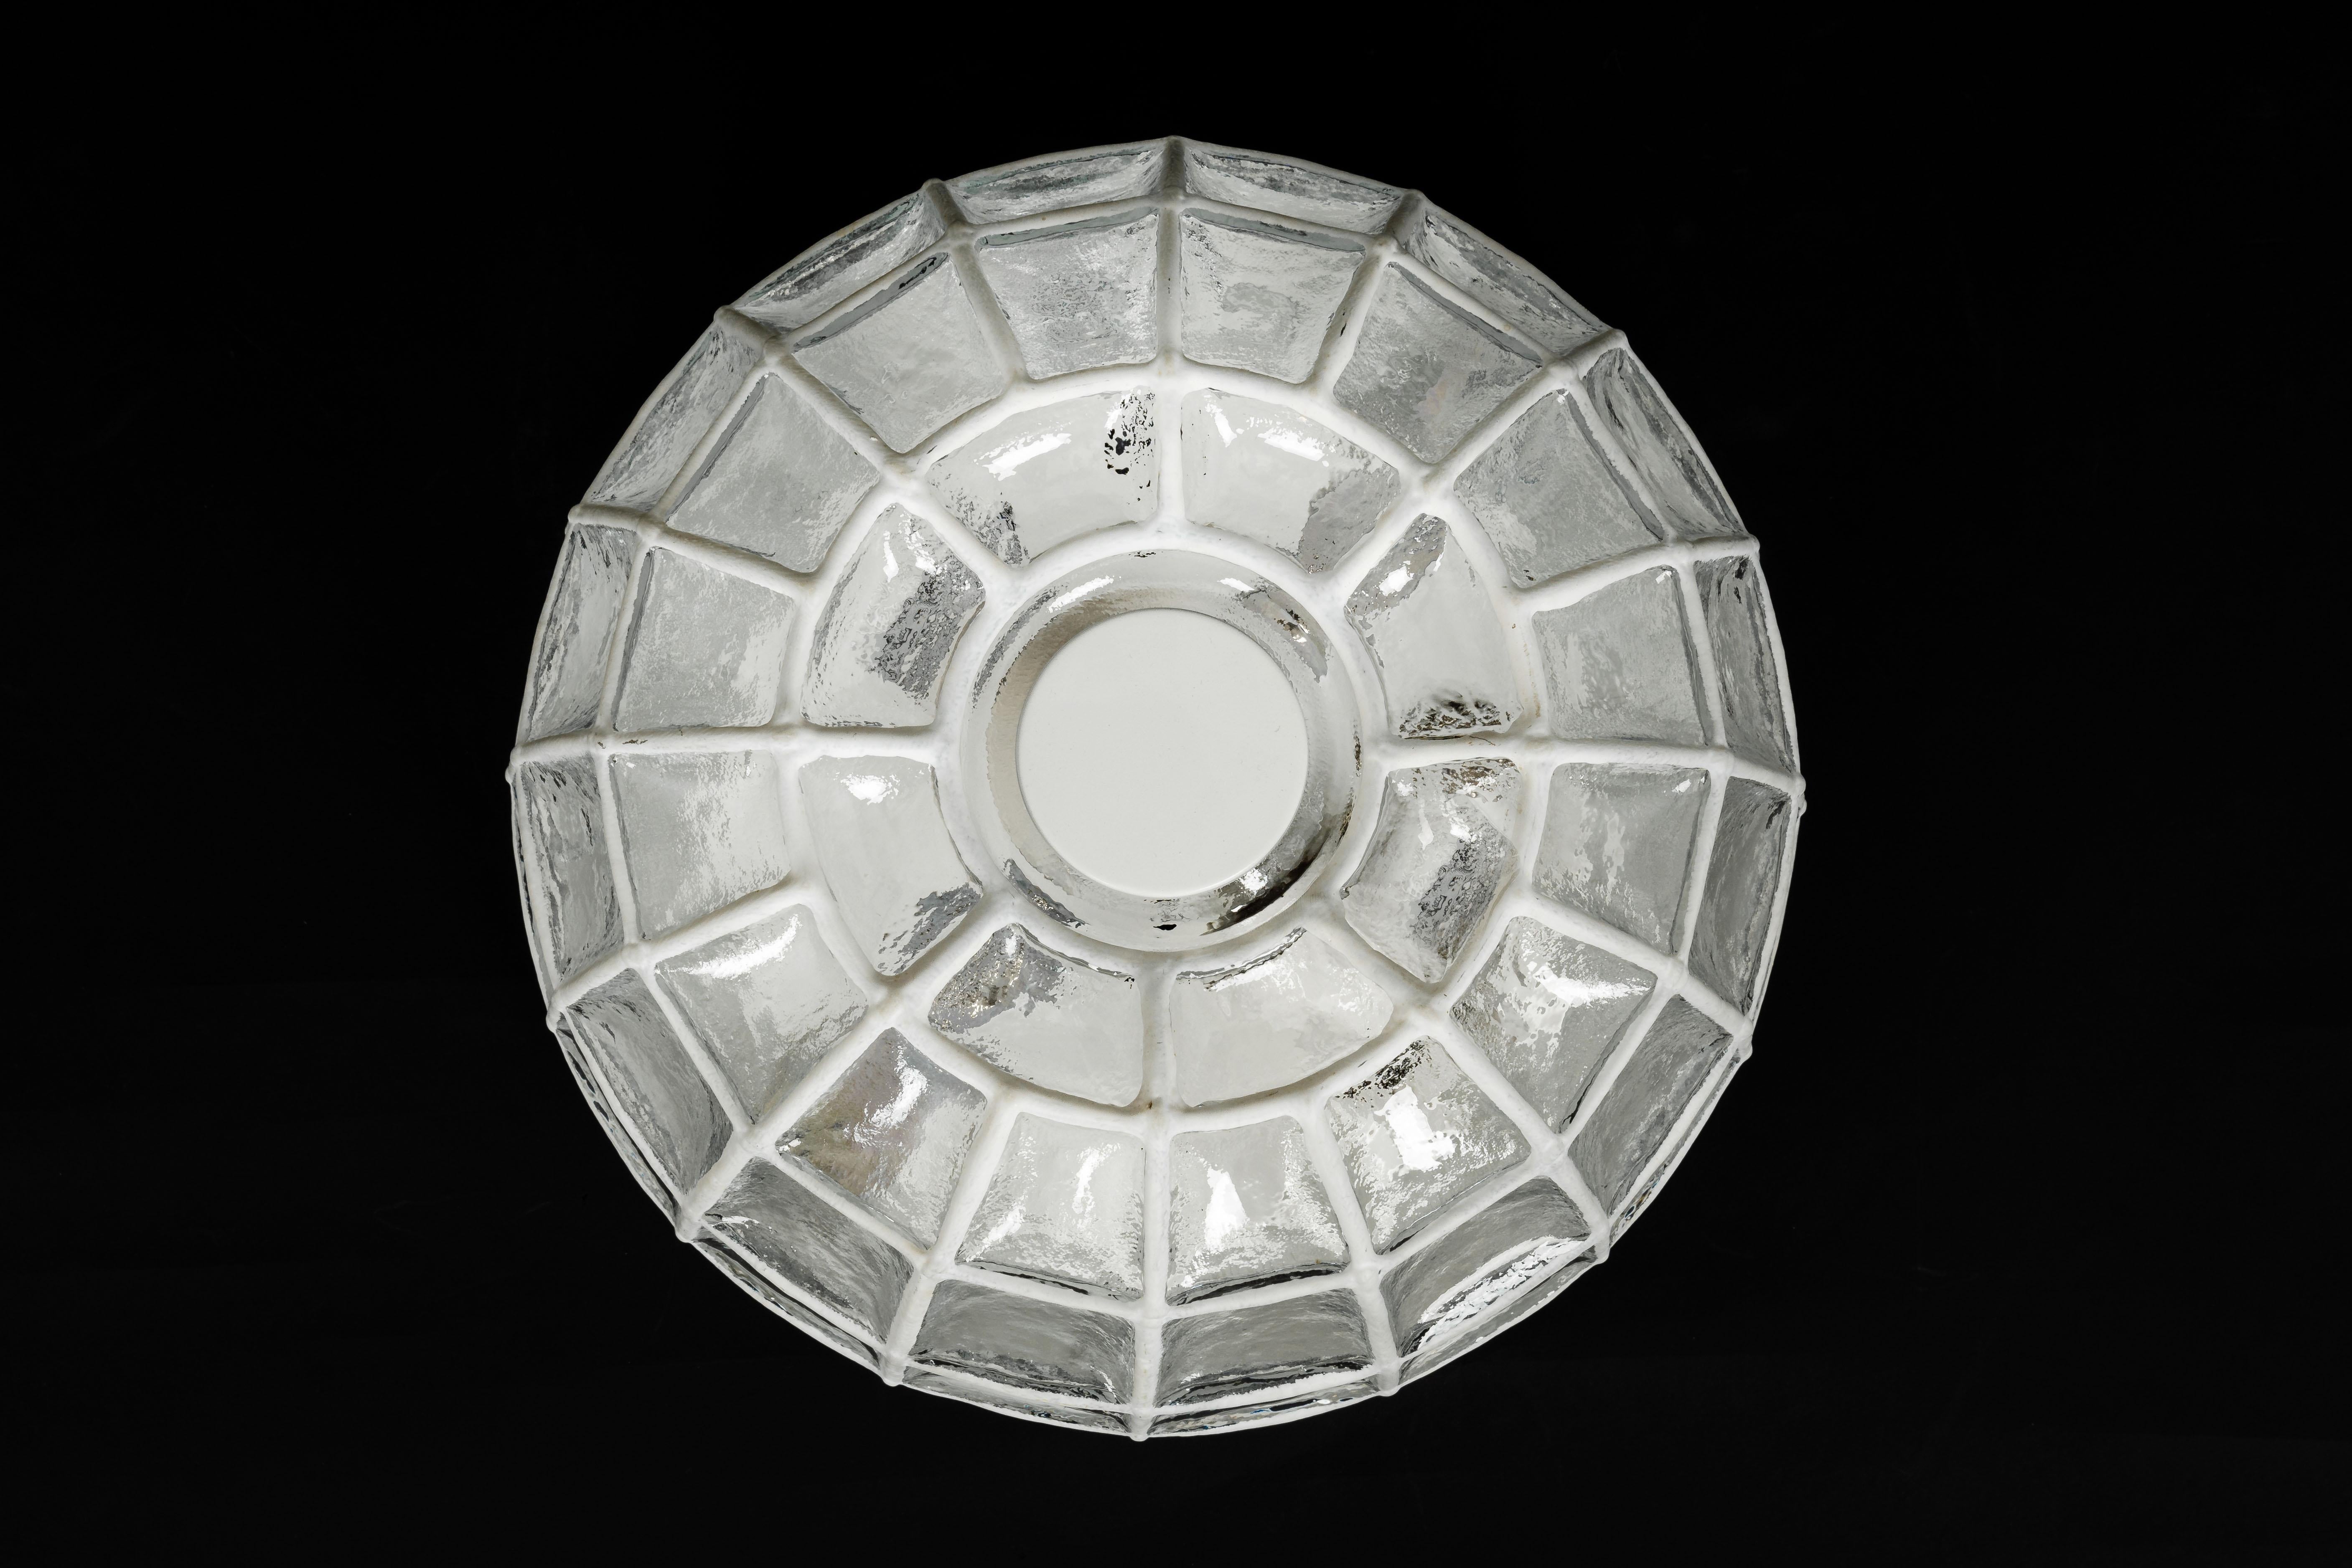 Minimalist white iron and clear glass ceiling or wall light manufactured by Limburg Glashu¨tte, Germany, circa 1960-1969.

Heavy quality and in very good condition. Cleaned, well-wired and ready to use. The fixture requires 1 x E27 standard bulbs